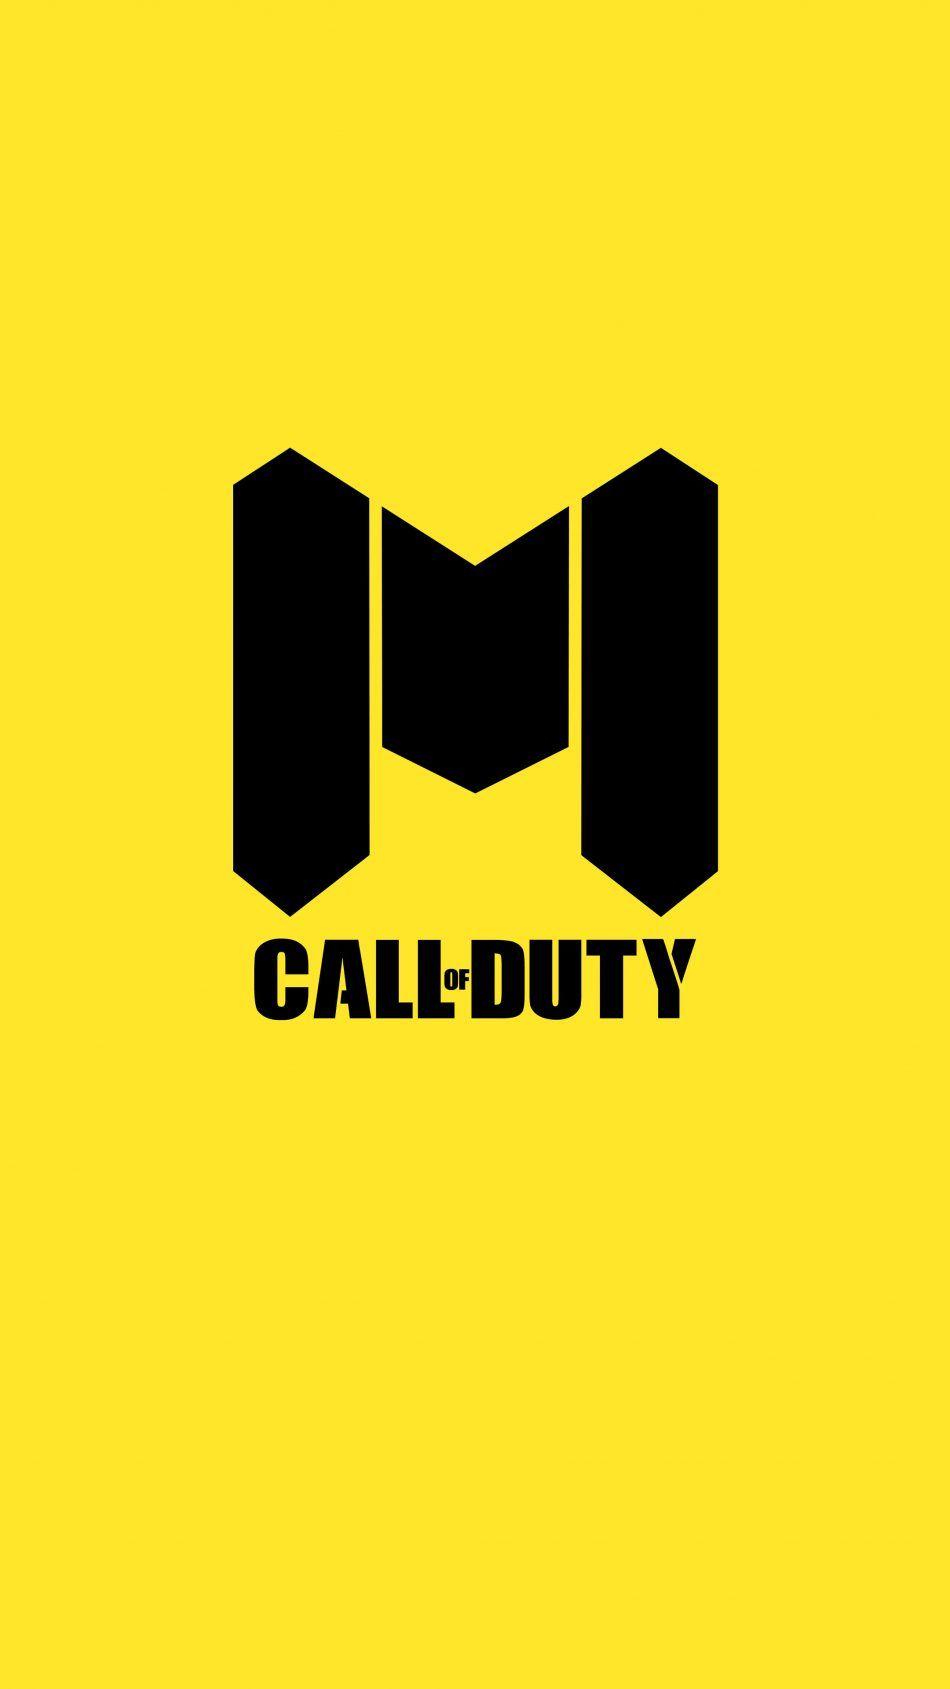 Call of Duty Mobile Logo Yellow Background. Call of duty, Mobile logo, Logo yellow